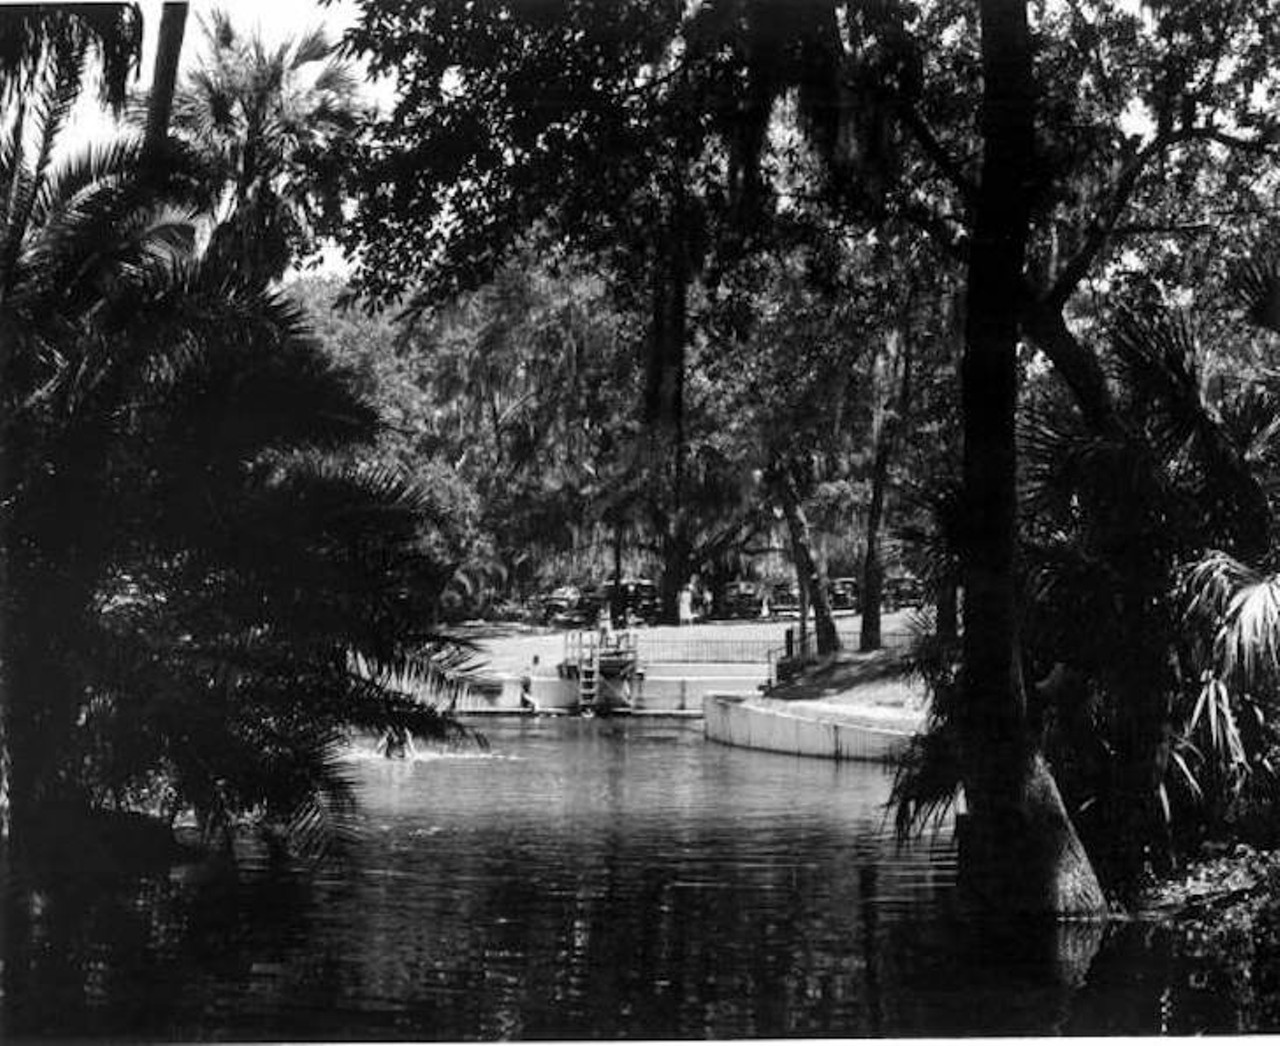 People enjoying the day at Sanlando Springs, sometime in the 1900s.